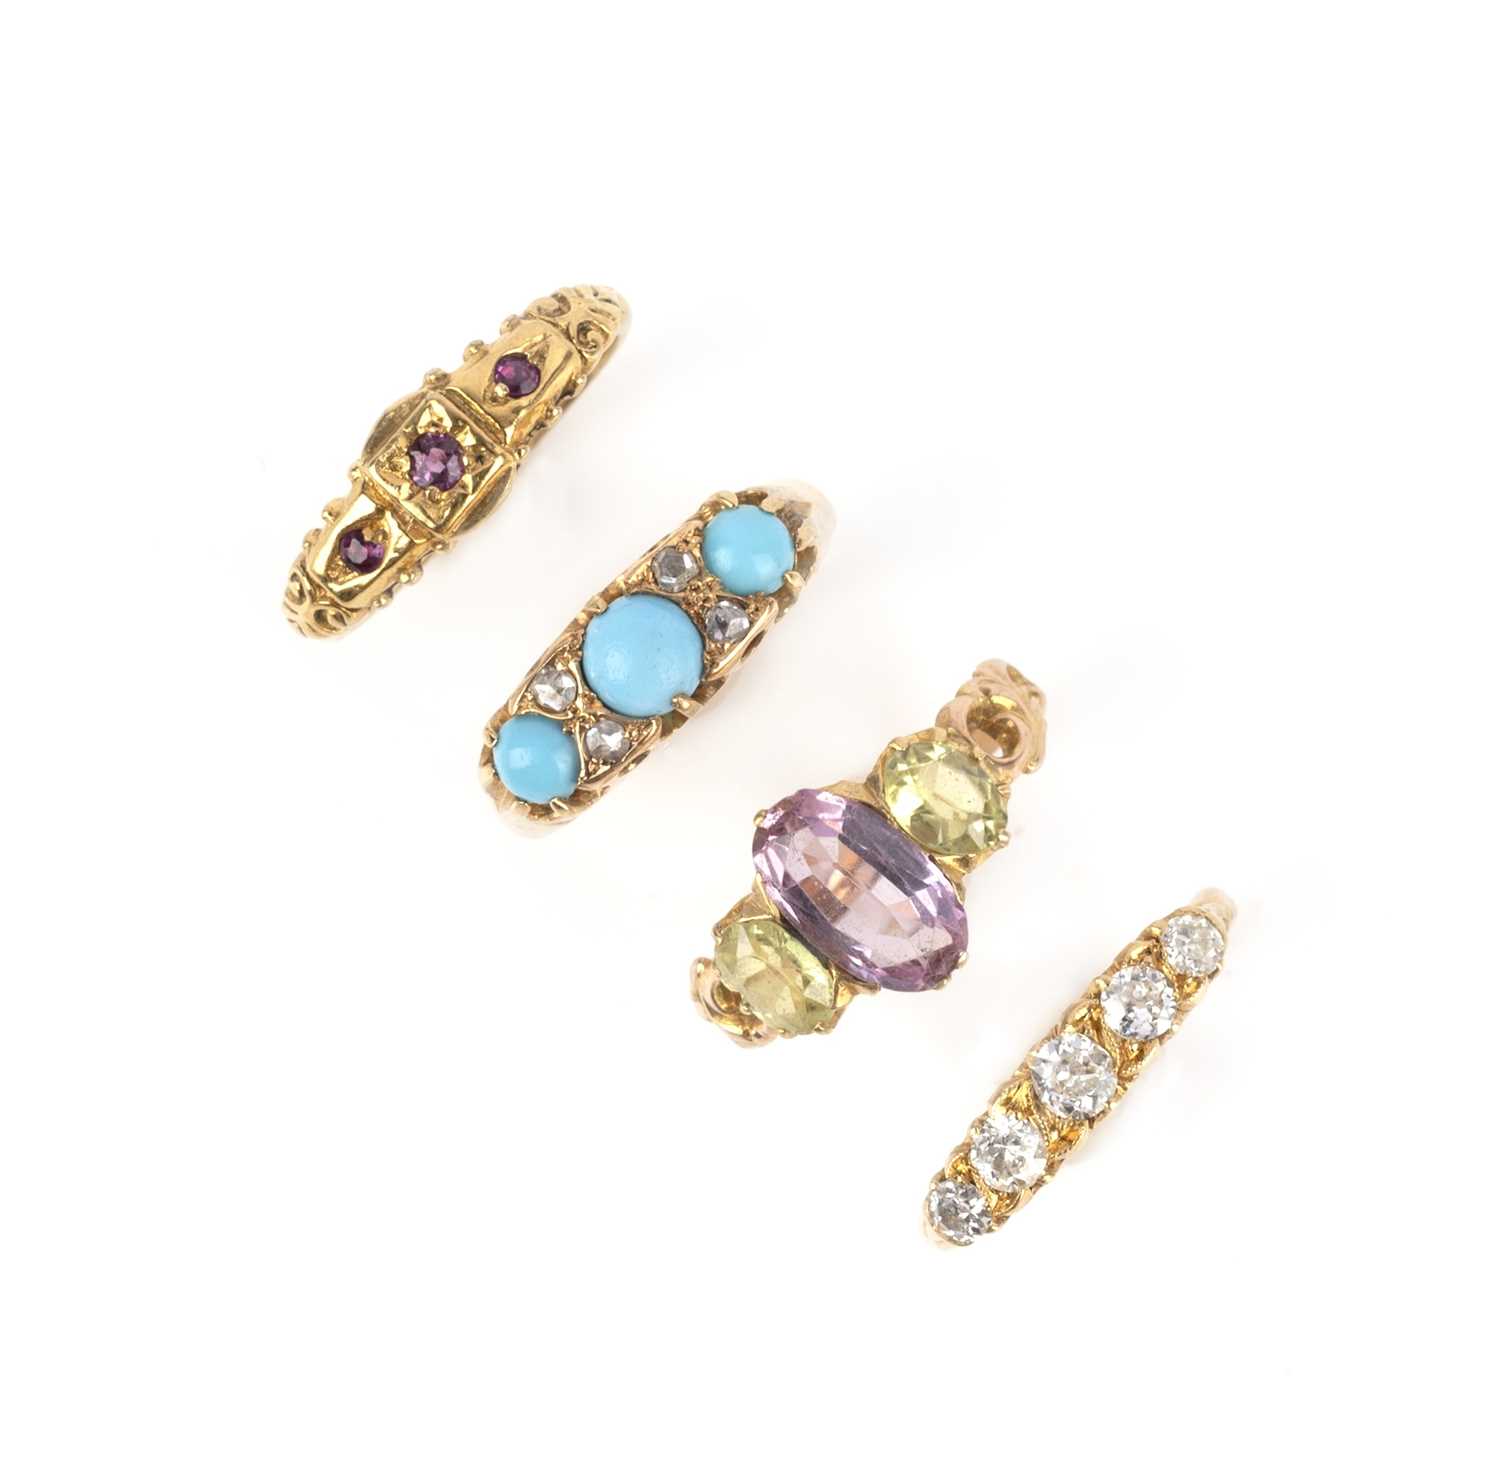 A collection of four gold and gem-set rings, 19th century, comprising: a pink topaz and